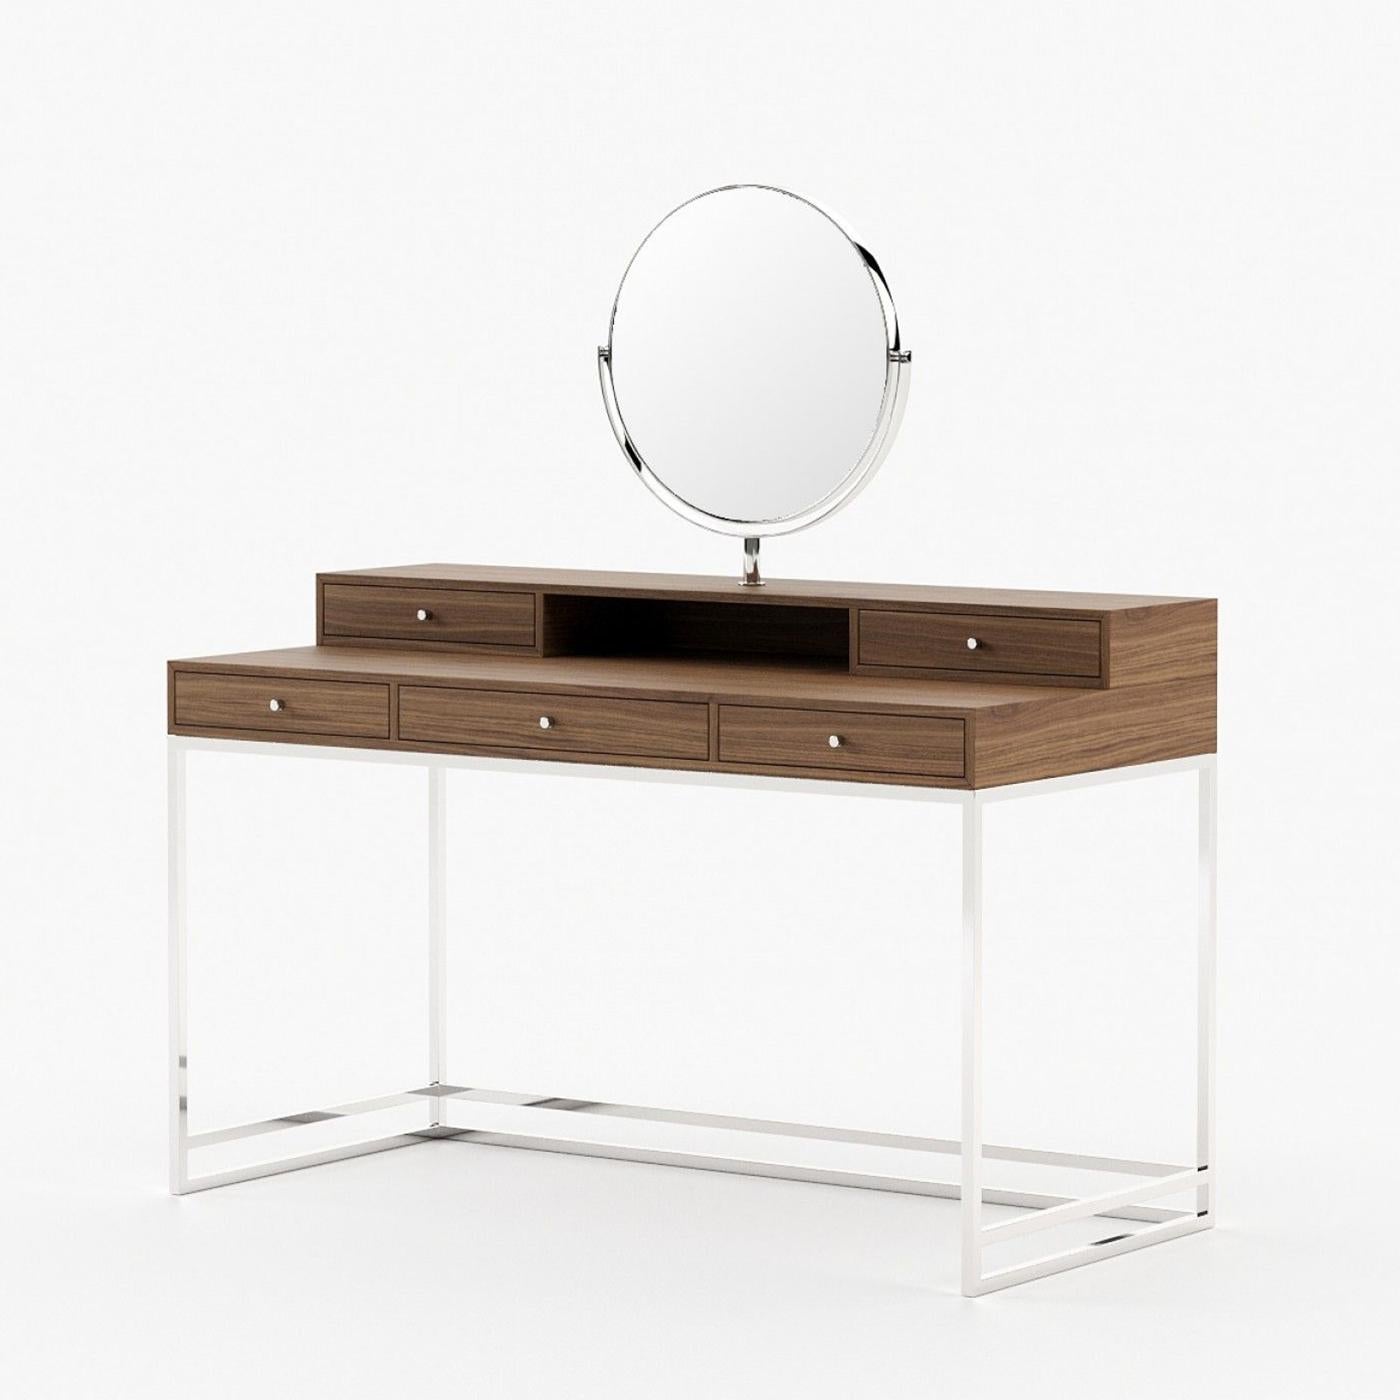 Dressing Table Clark Walnut with walnut wood vennered top with
5 drawers, with easy glide system, with a removable round mirror
with mirror glass, diameter 60cm. Mirror frame in polished stainless
steel finish. With base in polished stainless